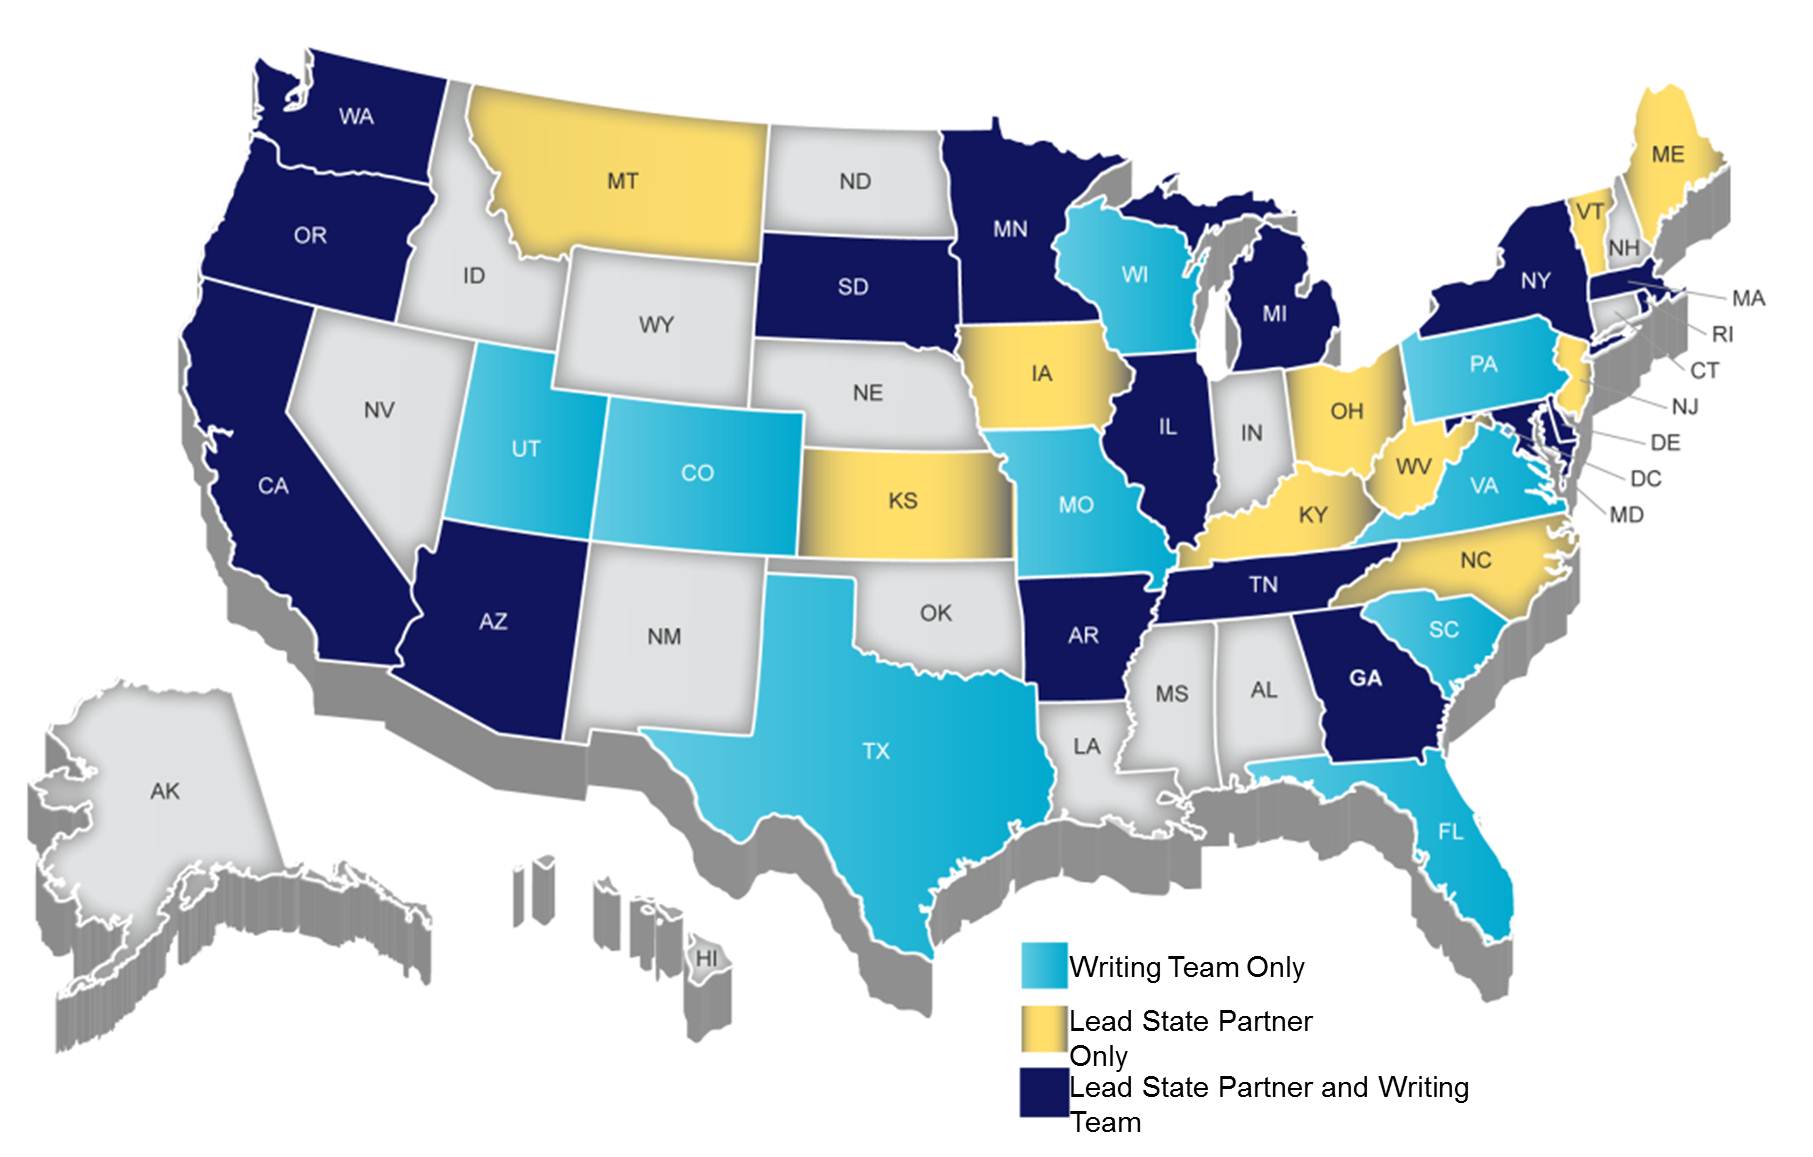 Map of lead states and writing team